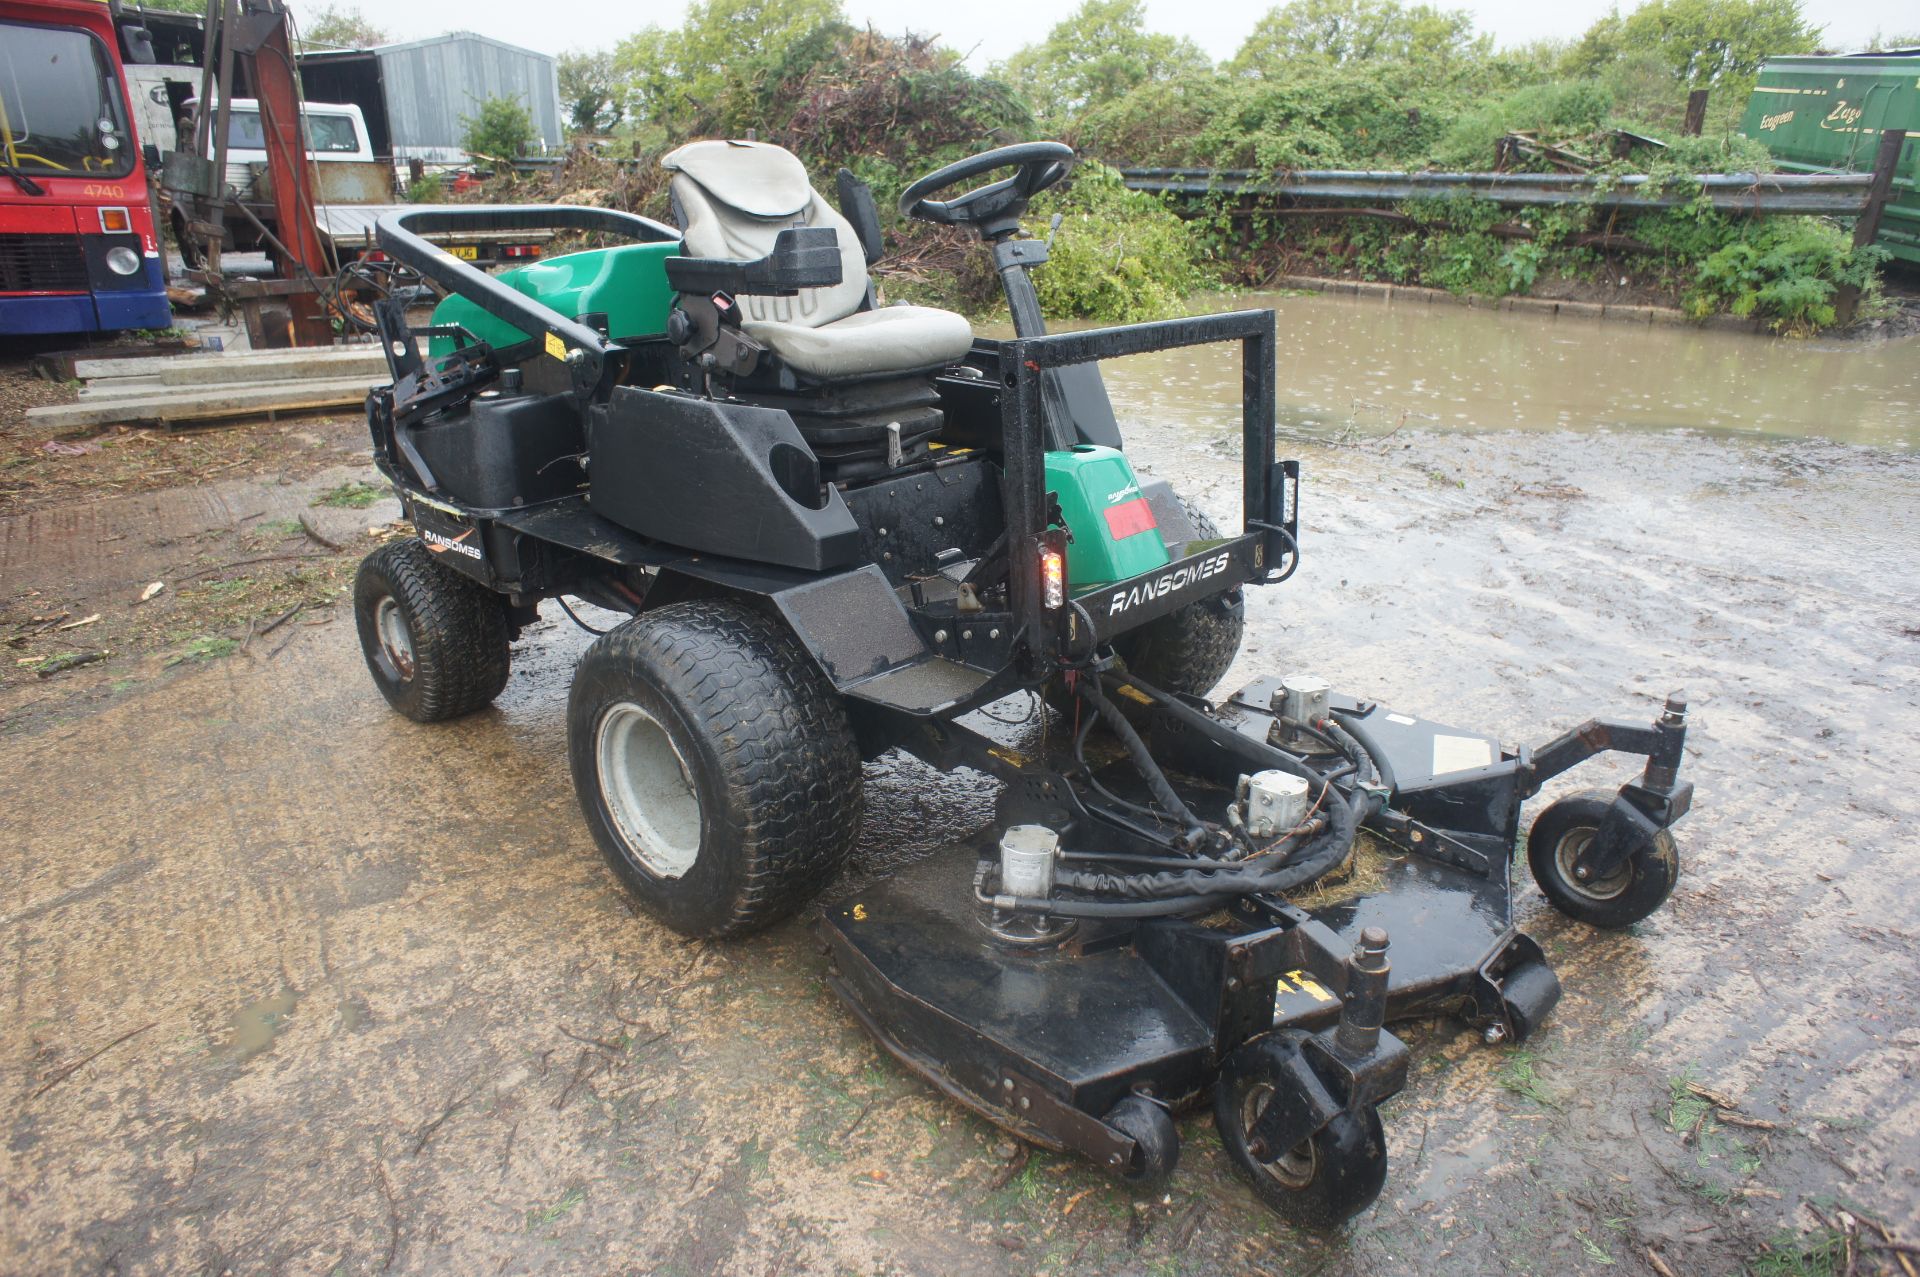 Ransomes HR300 Rotary Ride-On Mower, diesel engine, 60 in. cutting deck, ROPS bar, hazard led kit,